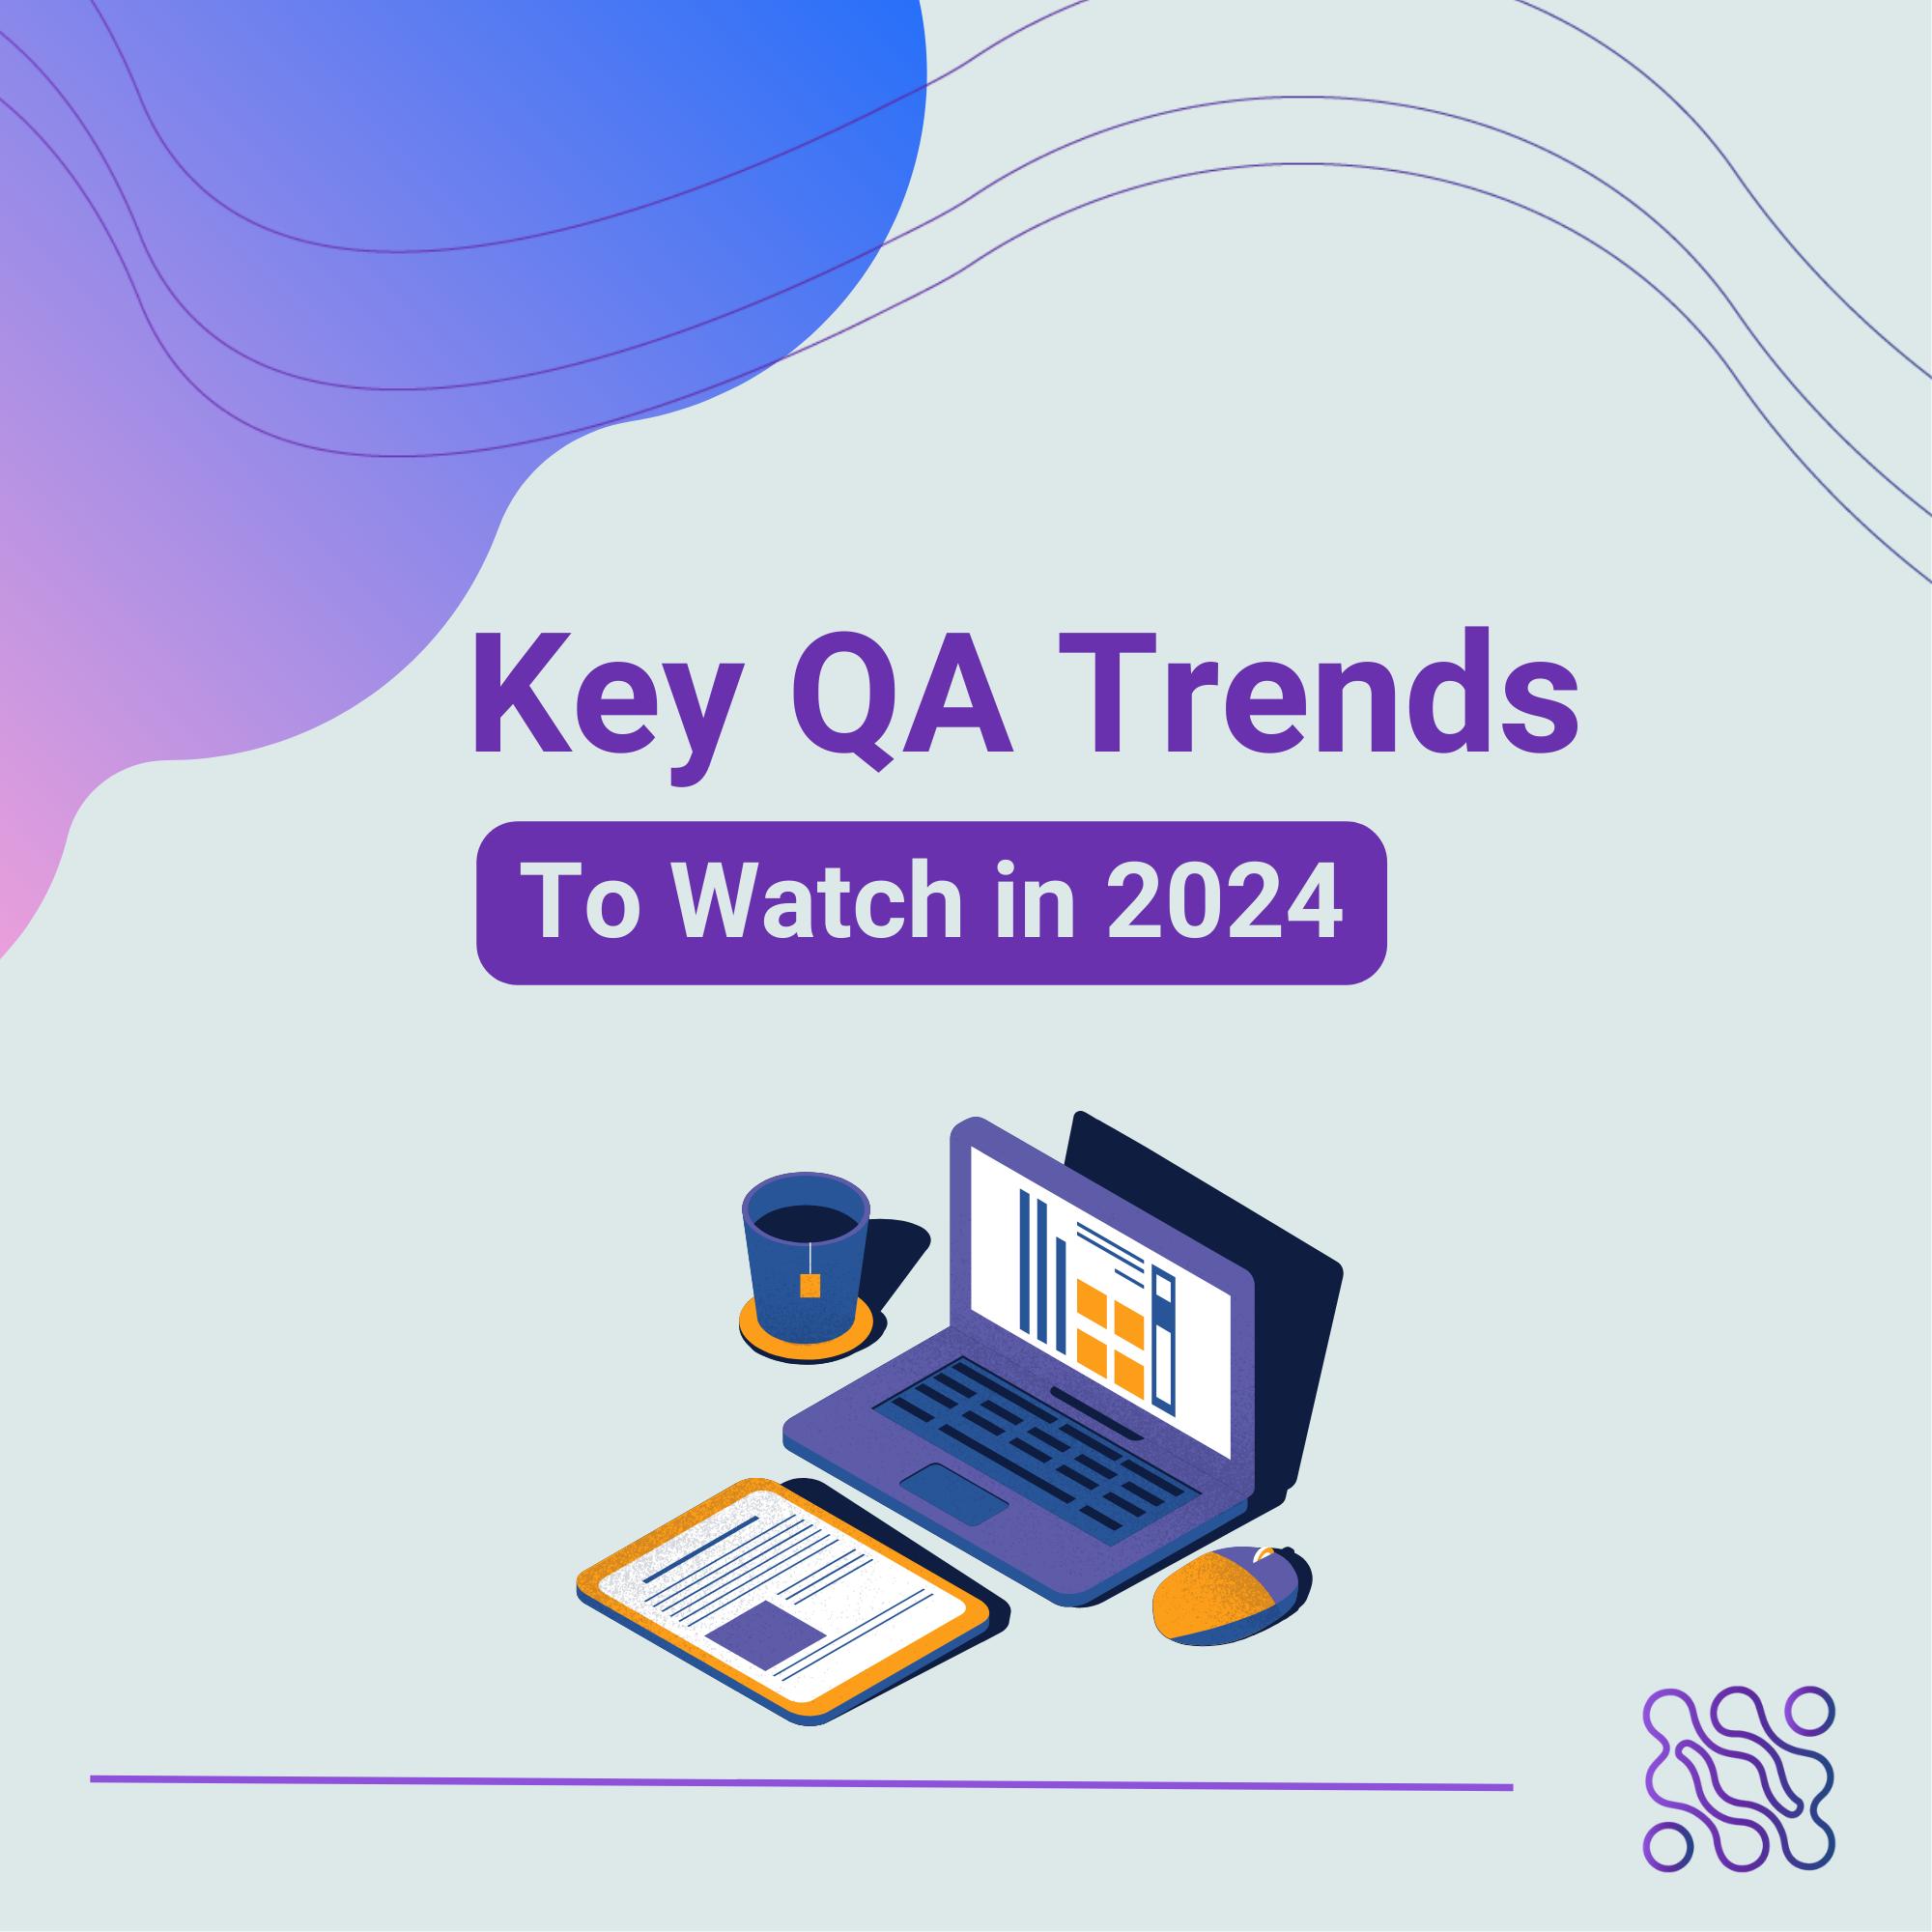 Key QA Trends to Watch in 2024